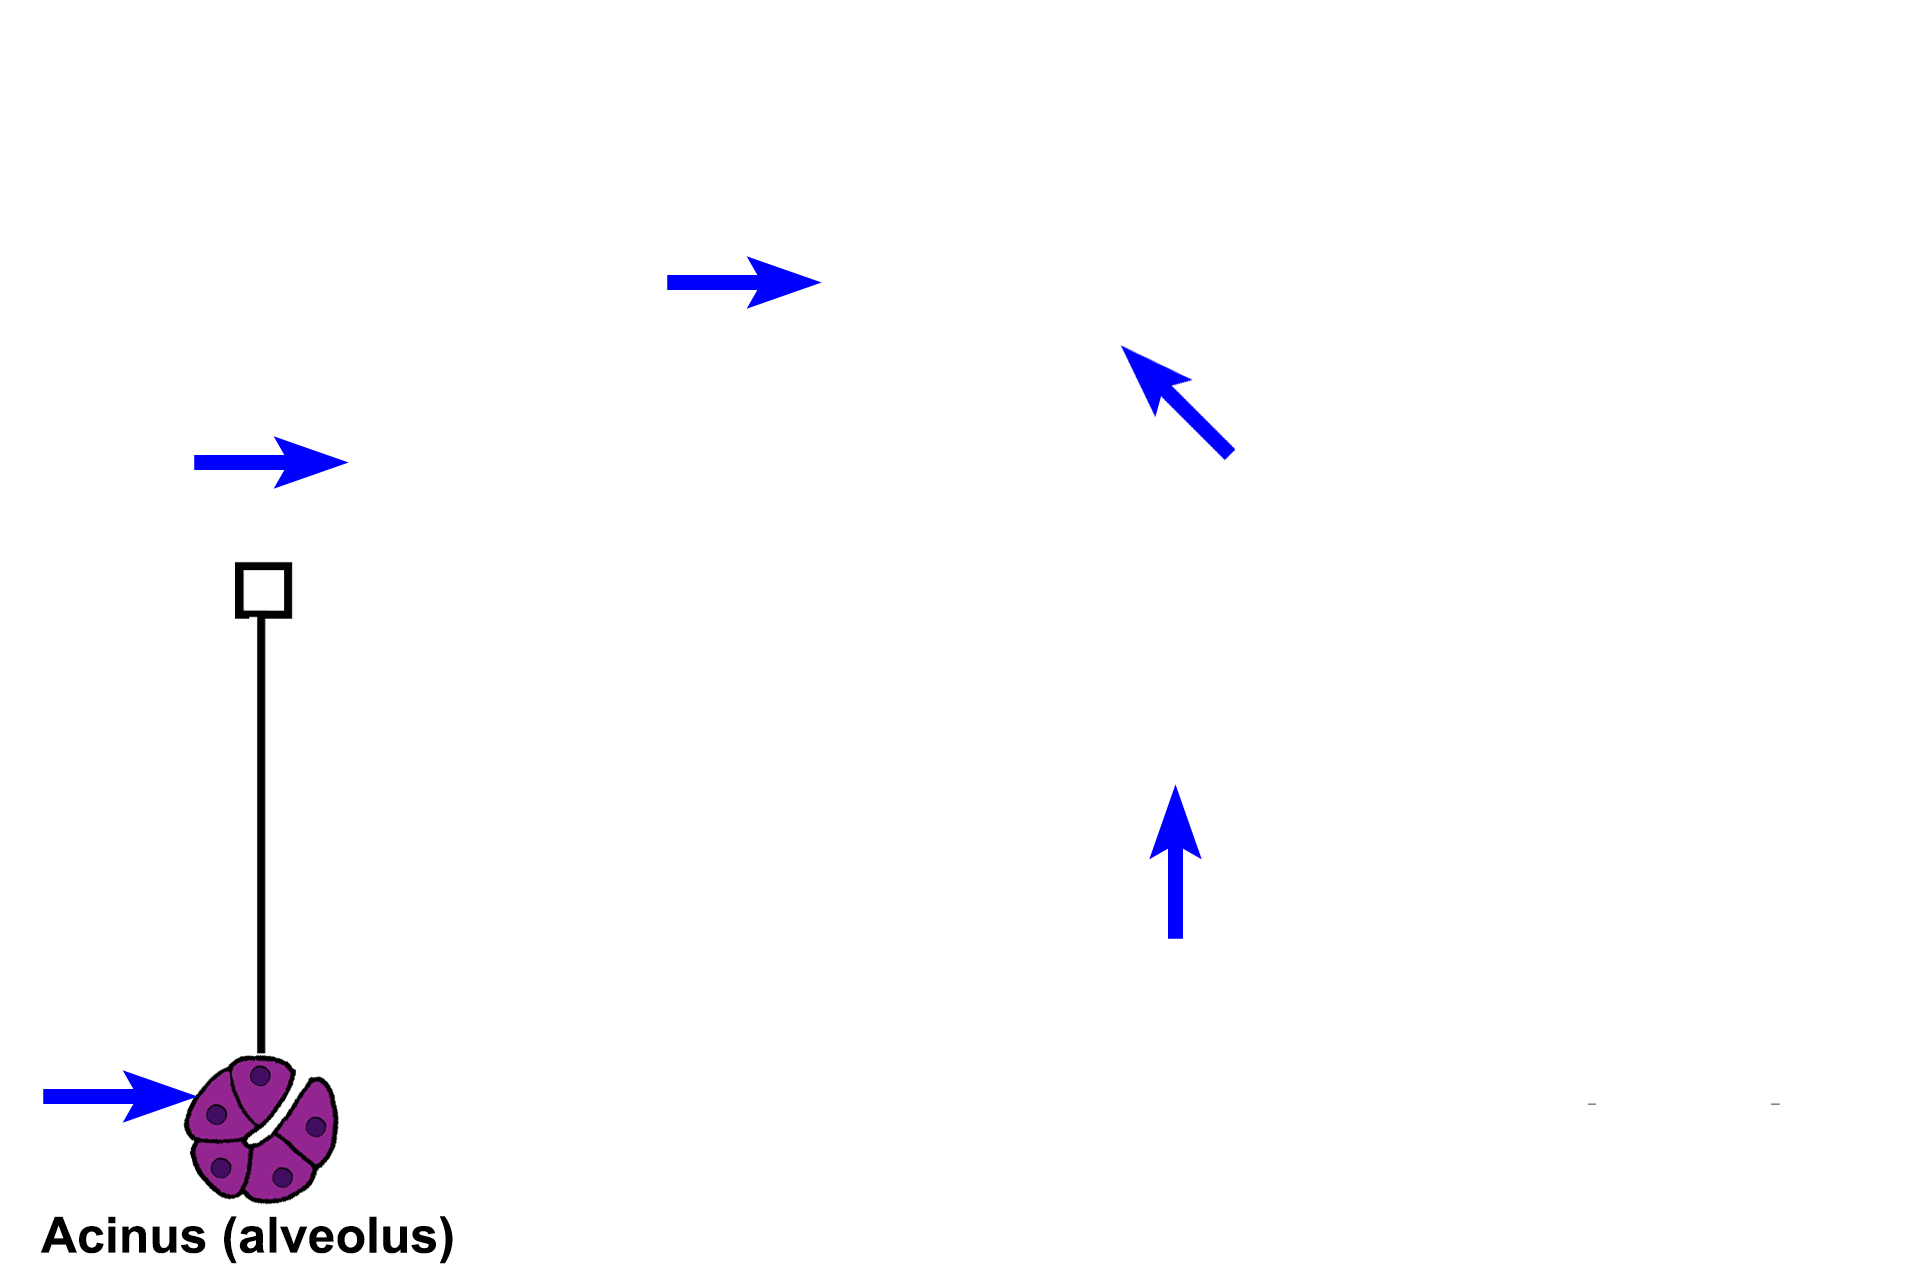 Interlobular connective tissue and septa <p>A lobule is a cluster of secretory units and the ducts that drain them.  The space immediately surrounding the secretory units and their ducts is occupied by a loose connective tissue, called intralobular connective tissue.  Between the lobules is interlobular connective tissue, a dense connective tissue that also forms partitions or septa within the gland.</p>
